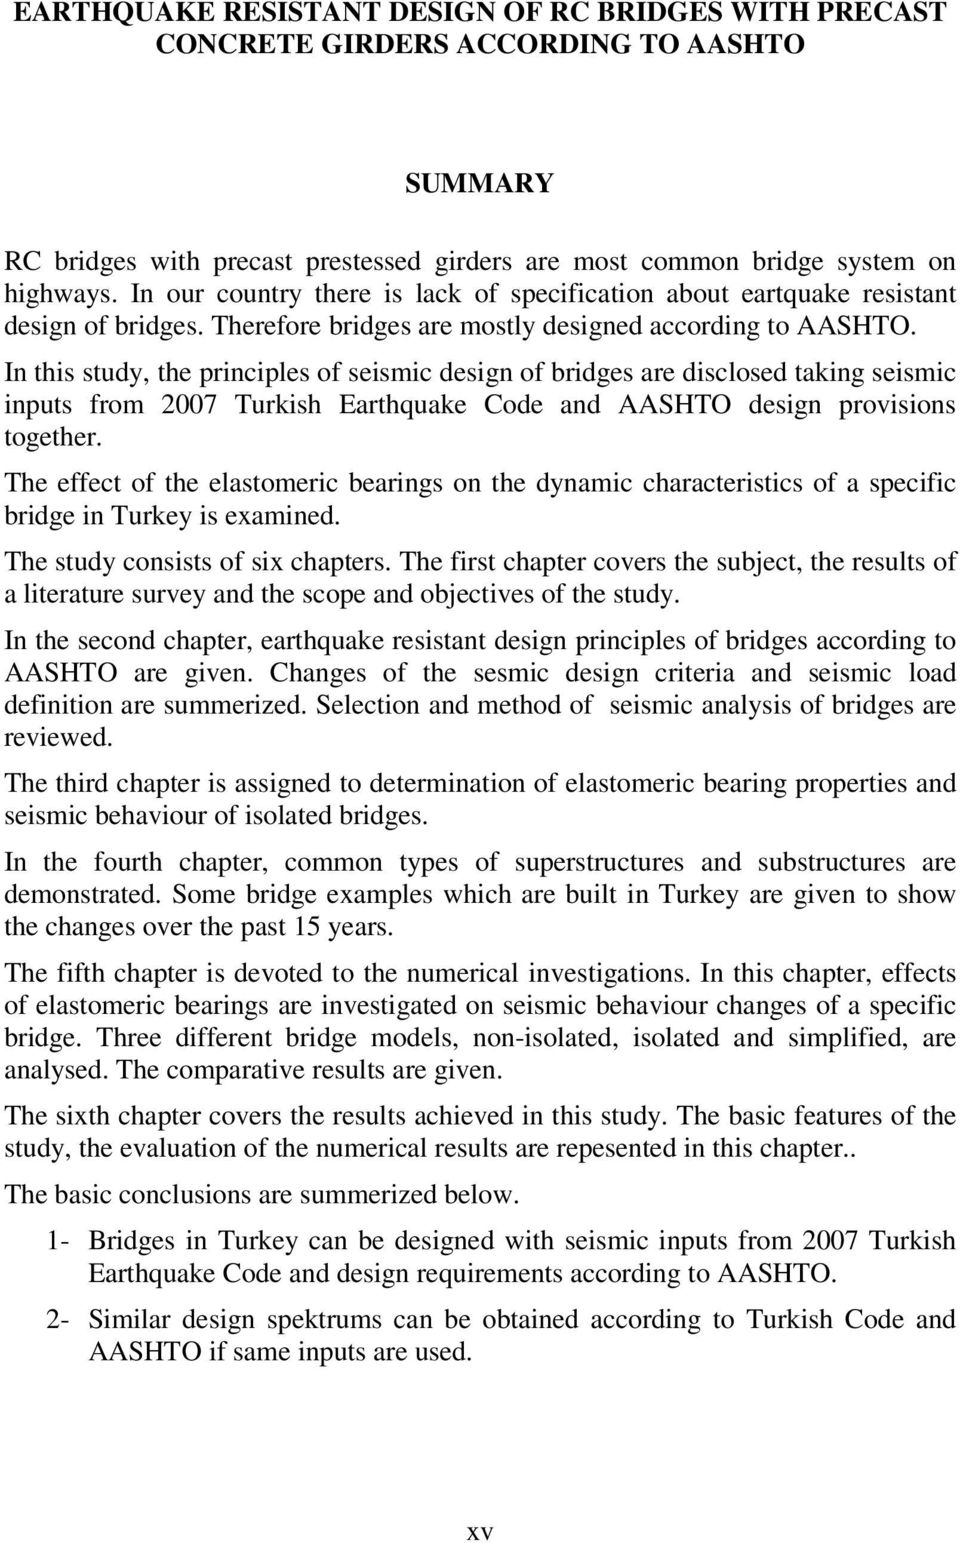 In this study, the principles of seismic design of bridges are disclosed taking seismic inputs from 2007 Turkish Earthquake Code and AASHTO design provisions together.